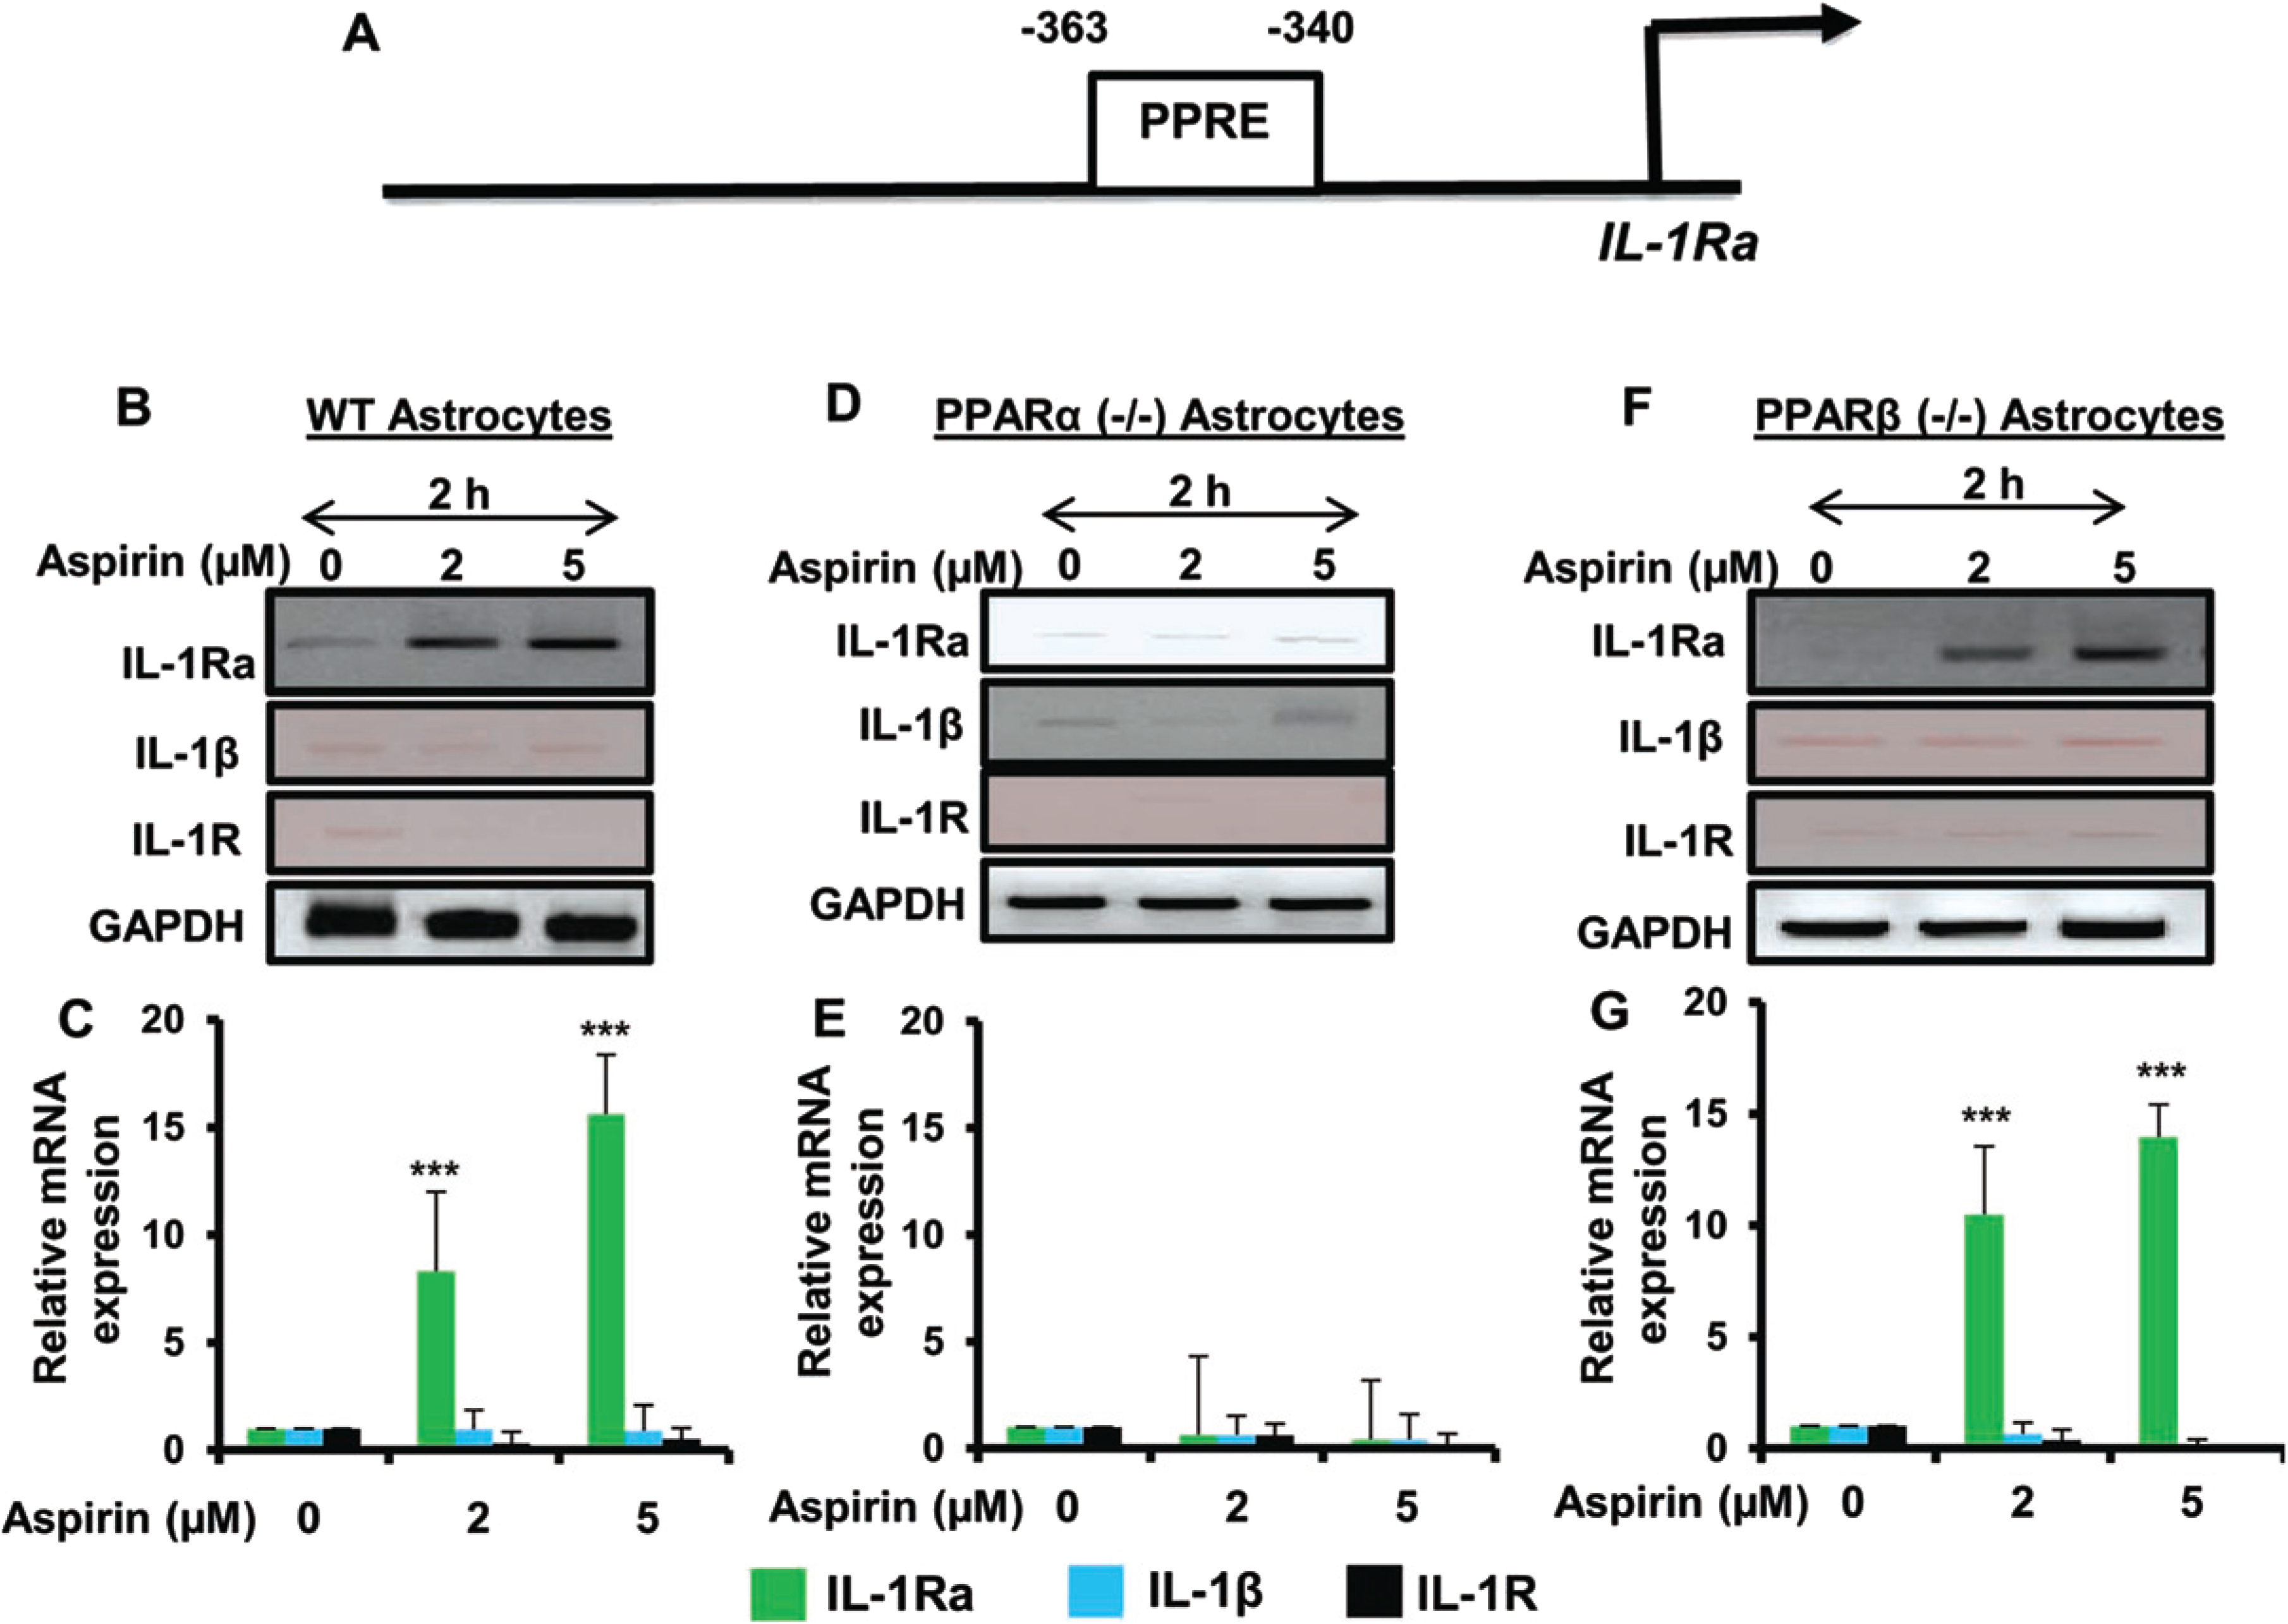 Aspirin-mediated increase in IL-1Ra mRNA is dependent on PPARα, but not PPARβ. Map of the IL-1Ra gene promoter harboring two PPREs at –363 to –340 bp (A). Cultured primary mouse astrocytes from wild type, PPARα–/– and PPARβ–/– treated with increasing doses of aspirin (2 and 5μM) show increasing induction of IL-1Ra mRNA in wild type and PPARβ–/–, but not PPARα–/–, astrocytes (B-G). Additionally, there were no significant changes in levels of IL-1β or IL-1R mRNA. Results are mean±SD of three experiments. *p < 0.05, **p < 0.01 and ***p < 0.001 by one-way ANOVA.